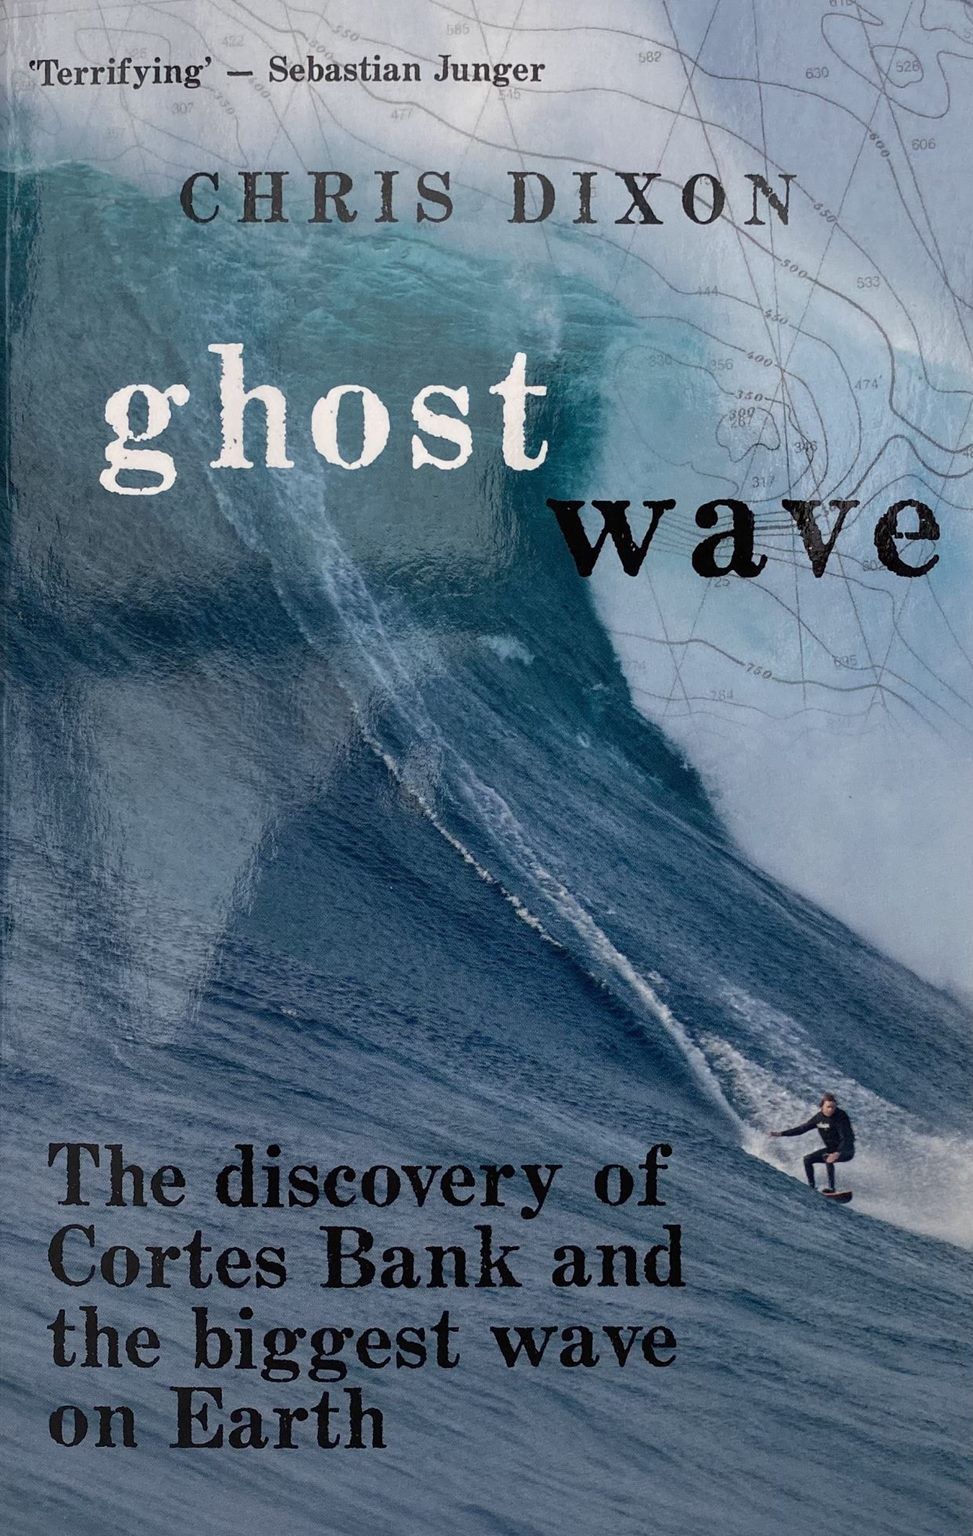 GHOST WAVE: The Discovery of Cortes Bank and the Biggest Wave on Earth